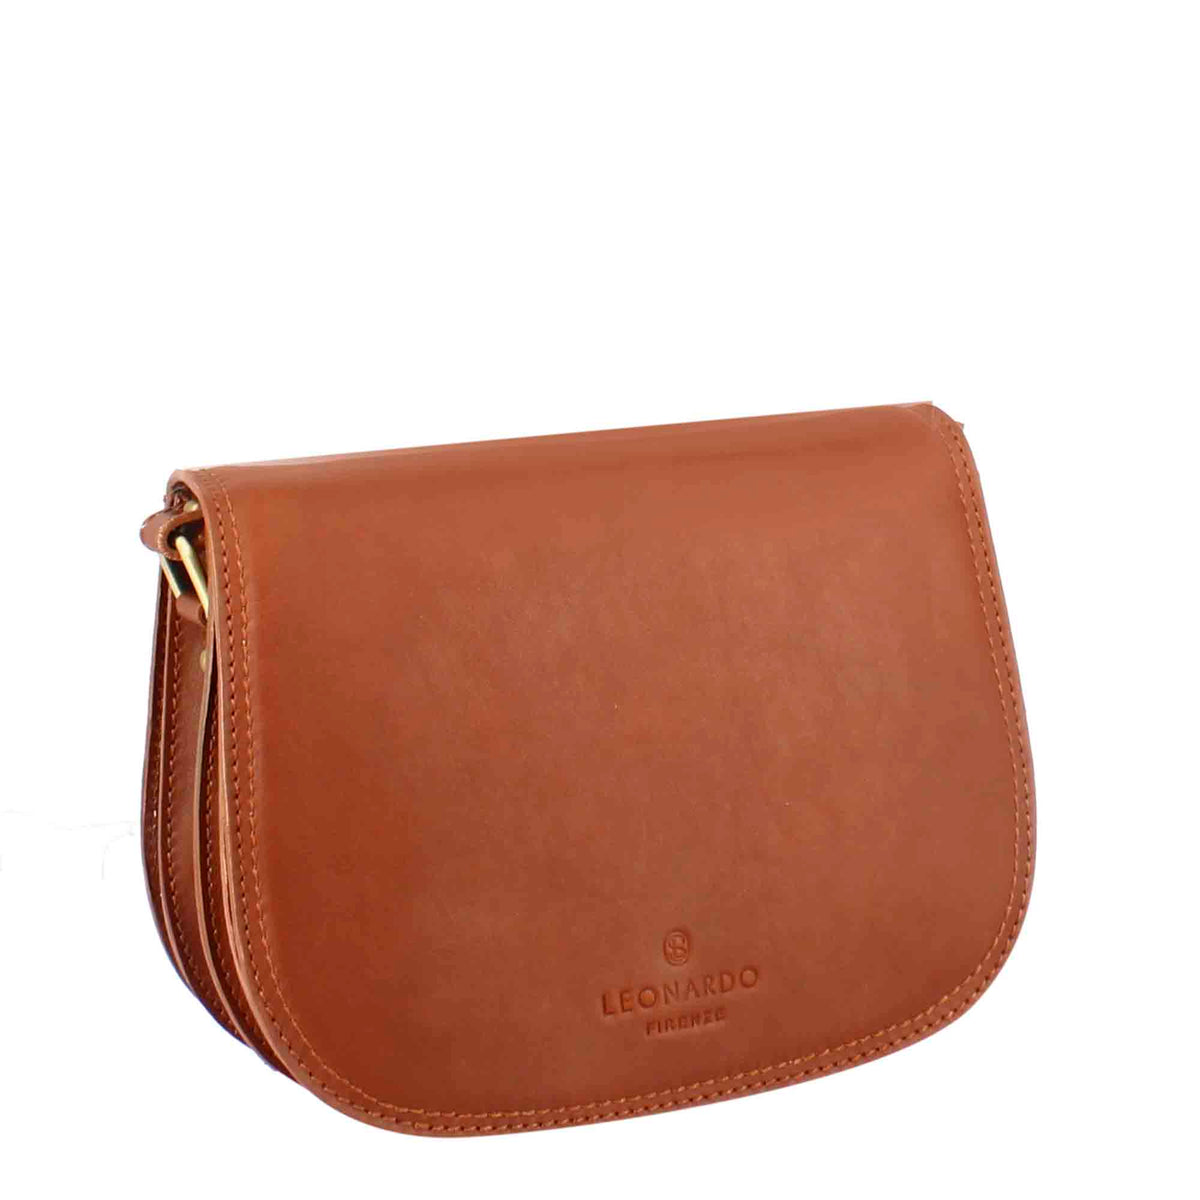 Essential women's bag in brown smooth leather